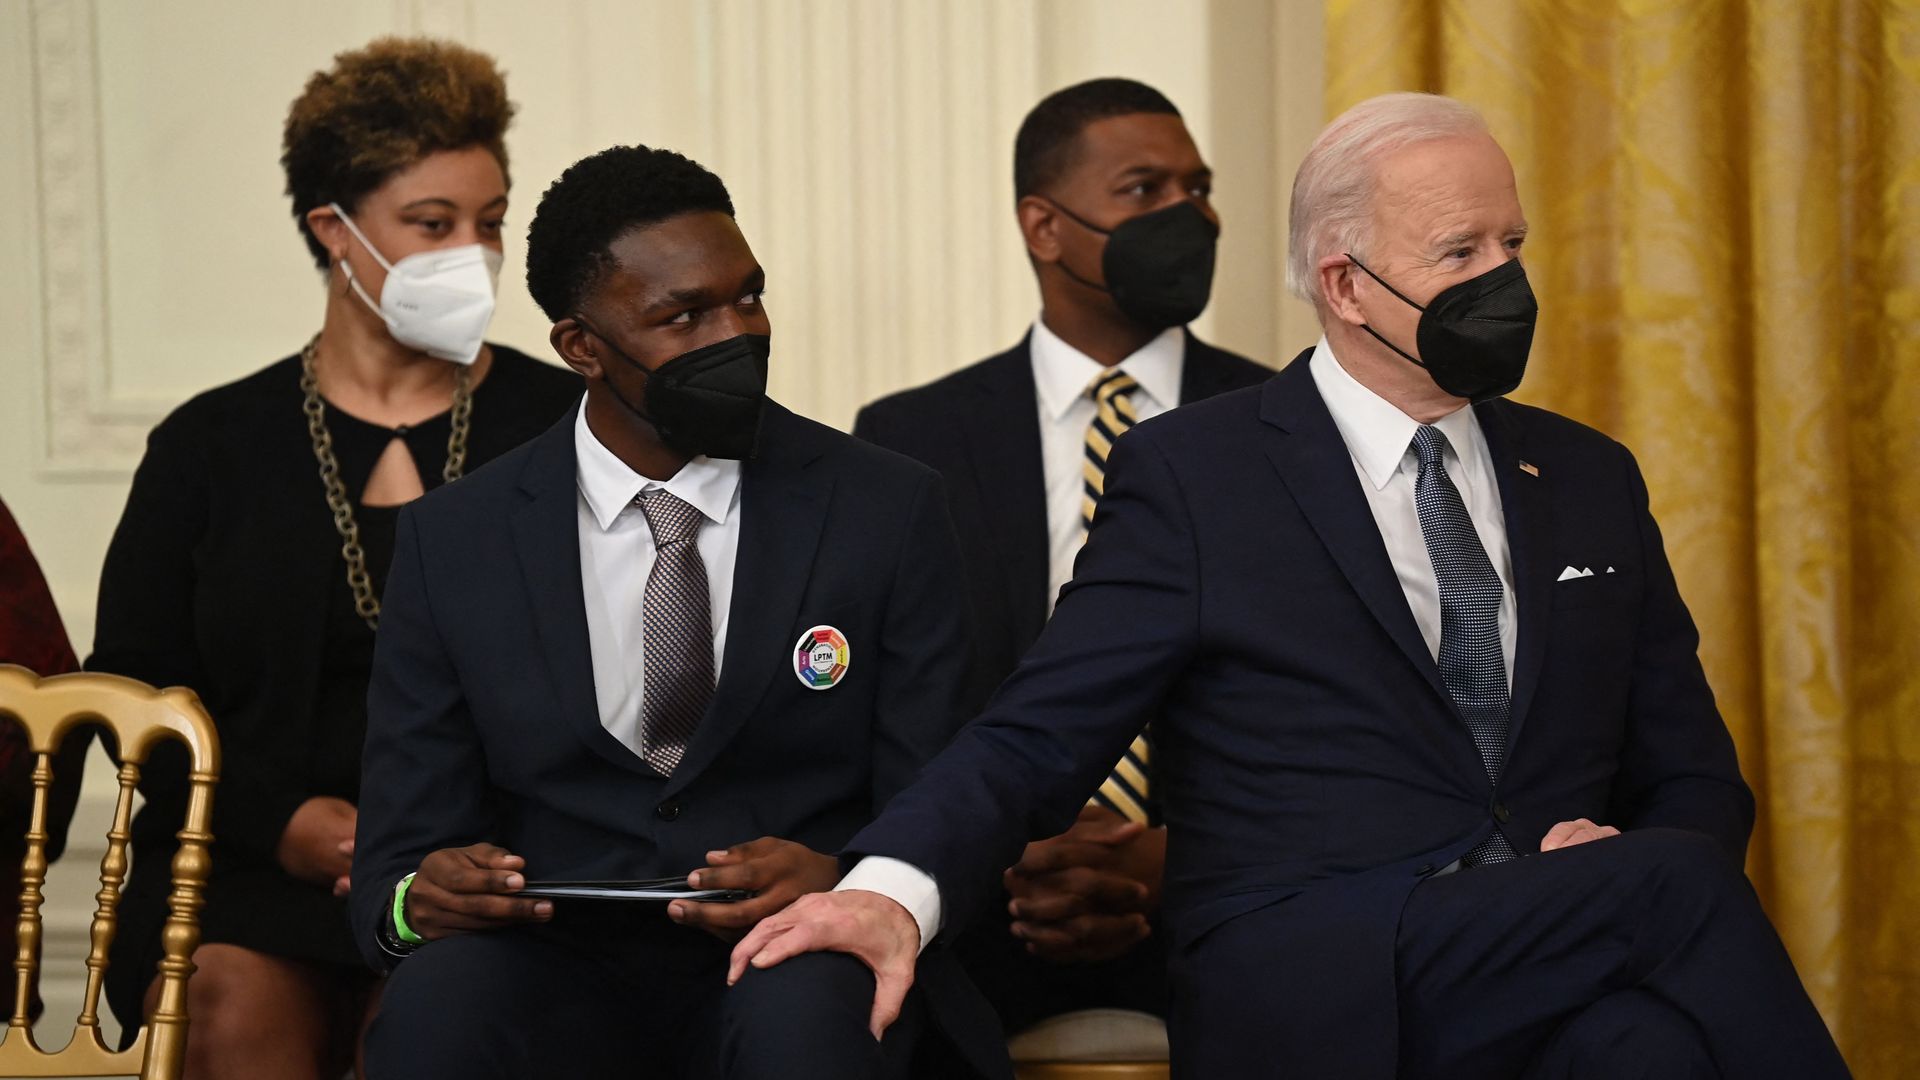 President Biden is seen grabbing the knee of a student being honored at a White House event to close out Black History Month.